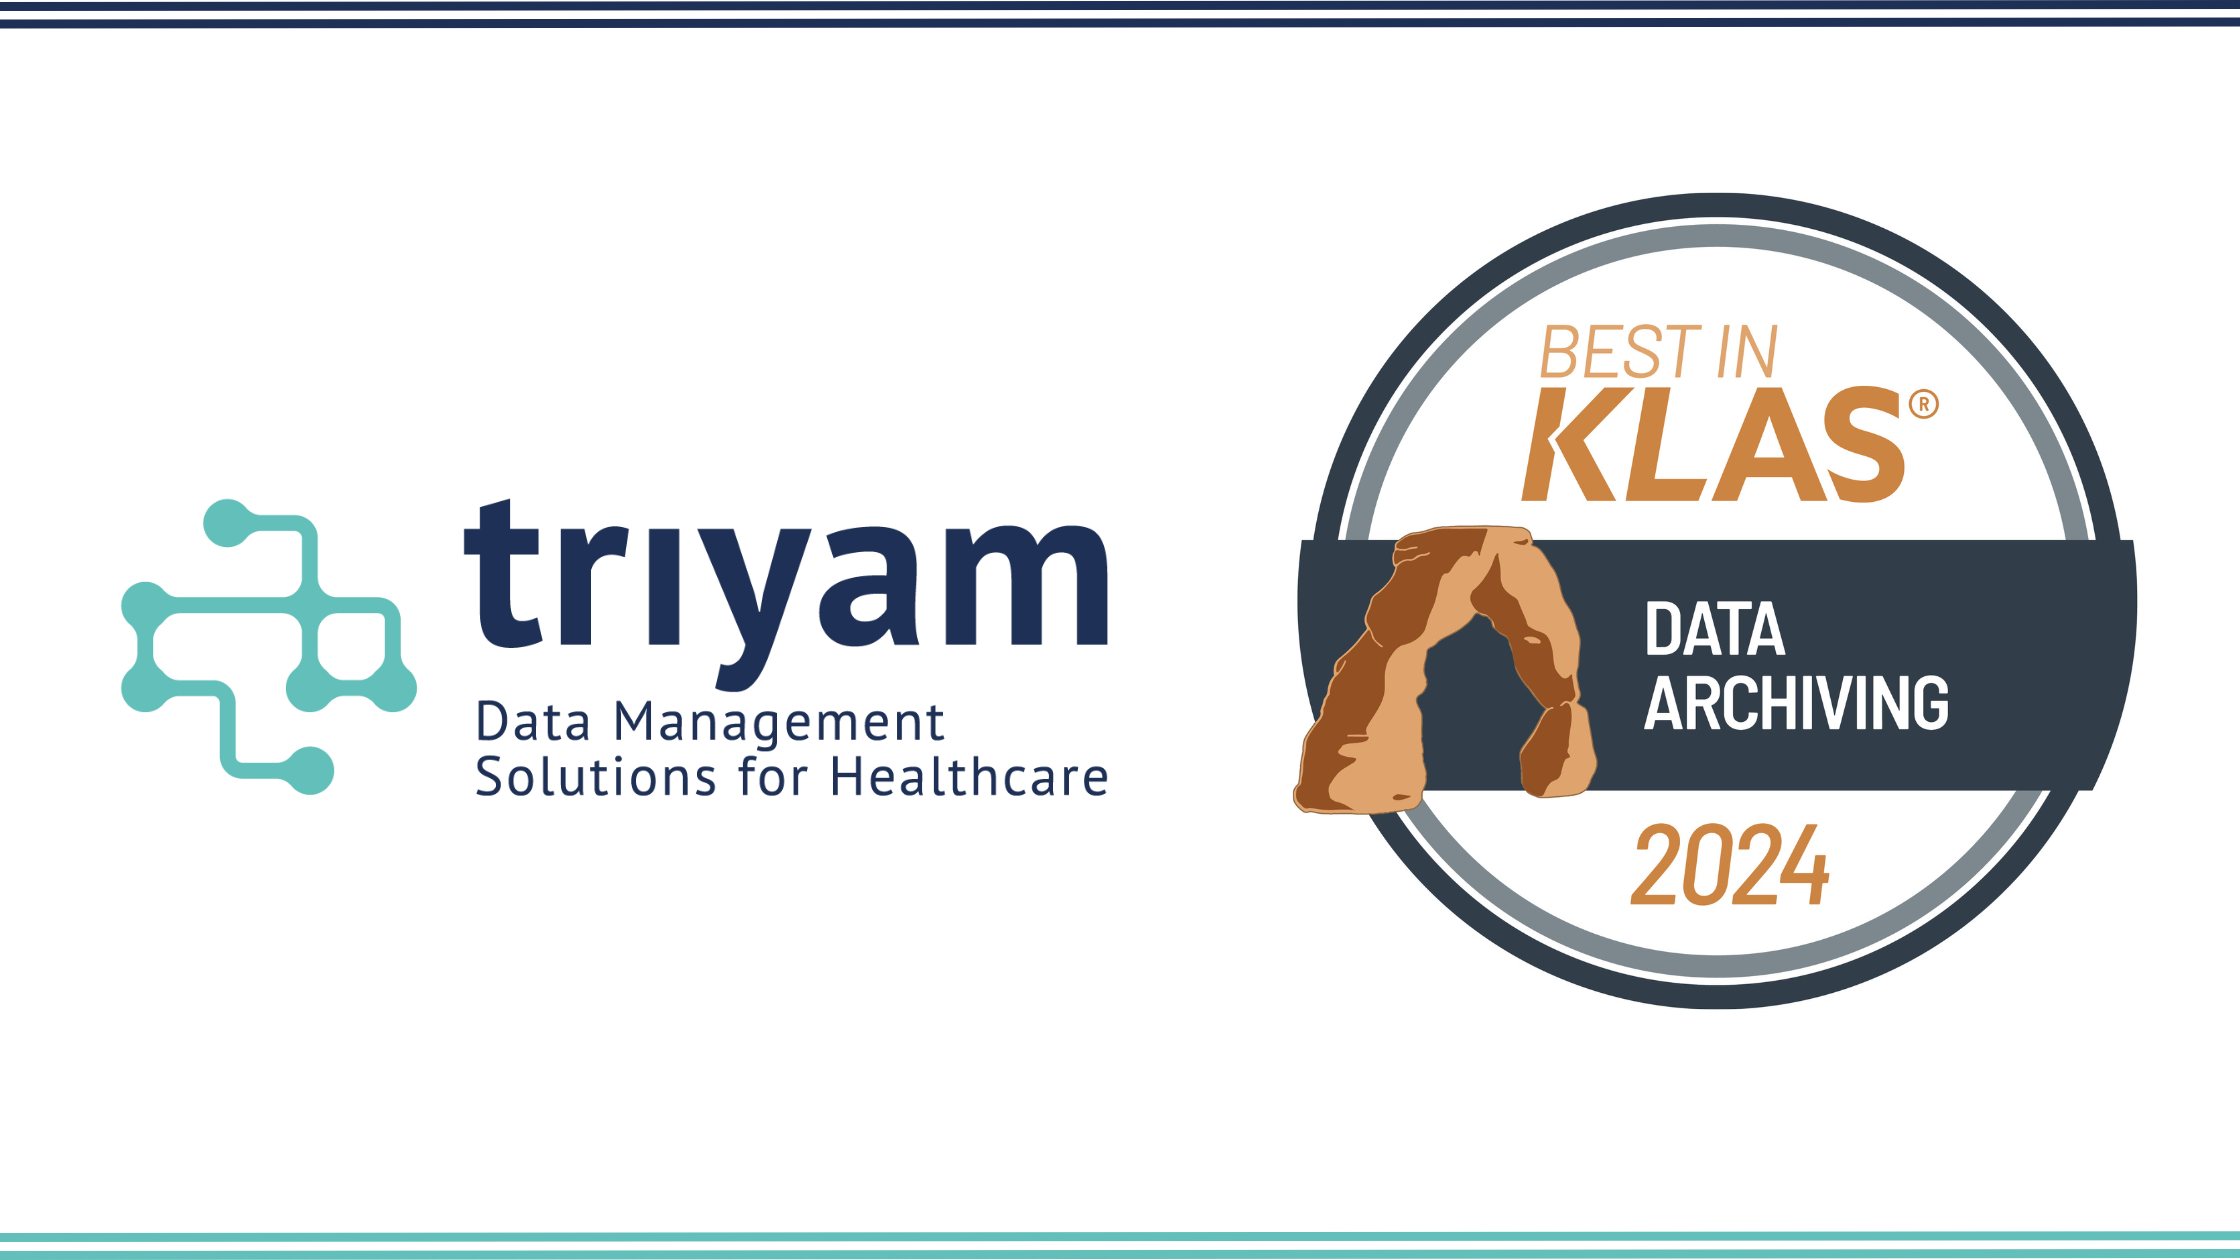 Triyam Triumphs with Top Honors:  Best in KLAS 2024 for Data Archiving